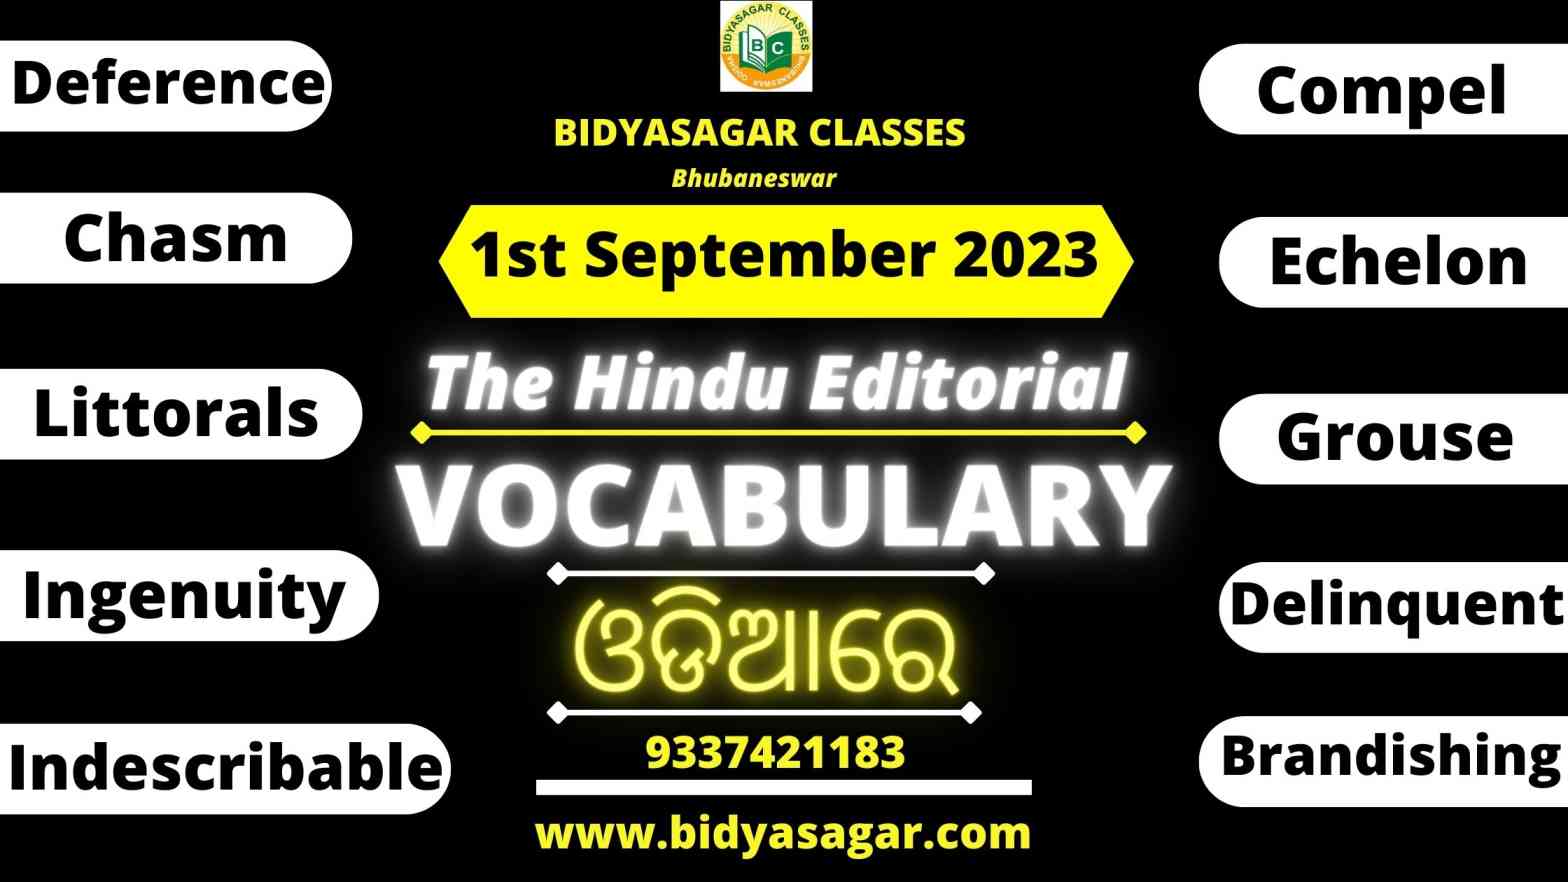 The Hindu Editorial Vocabulary of 1st September 2023